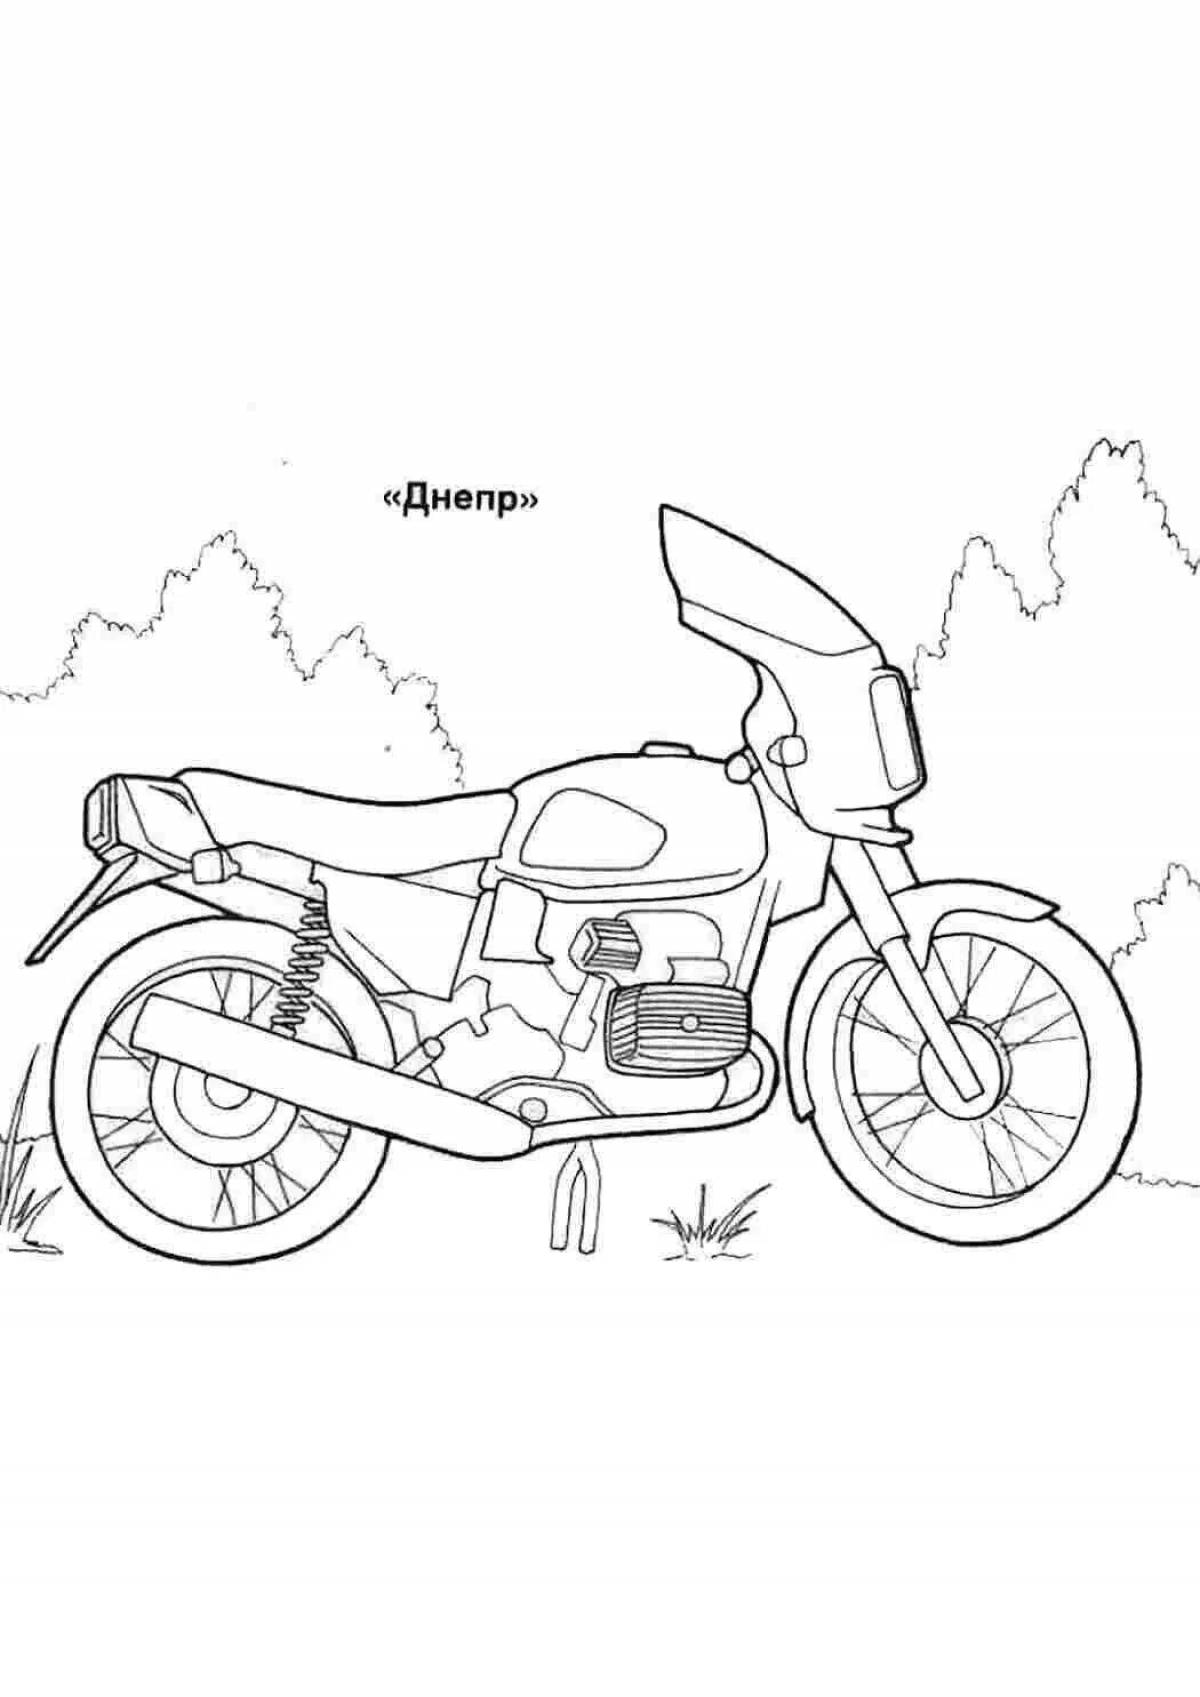 Outstanding coloring book for boys with motorcycles and bicycles